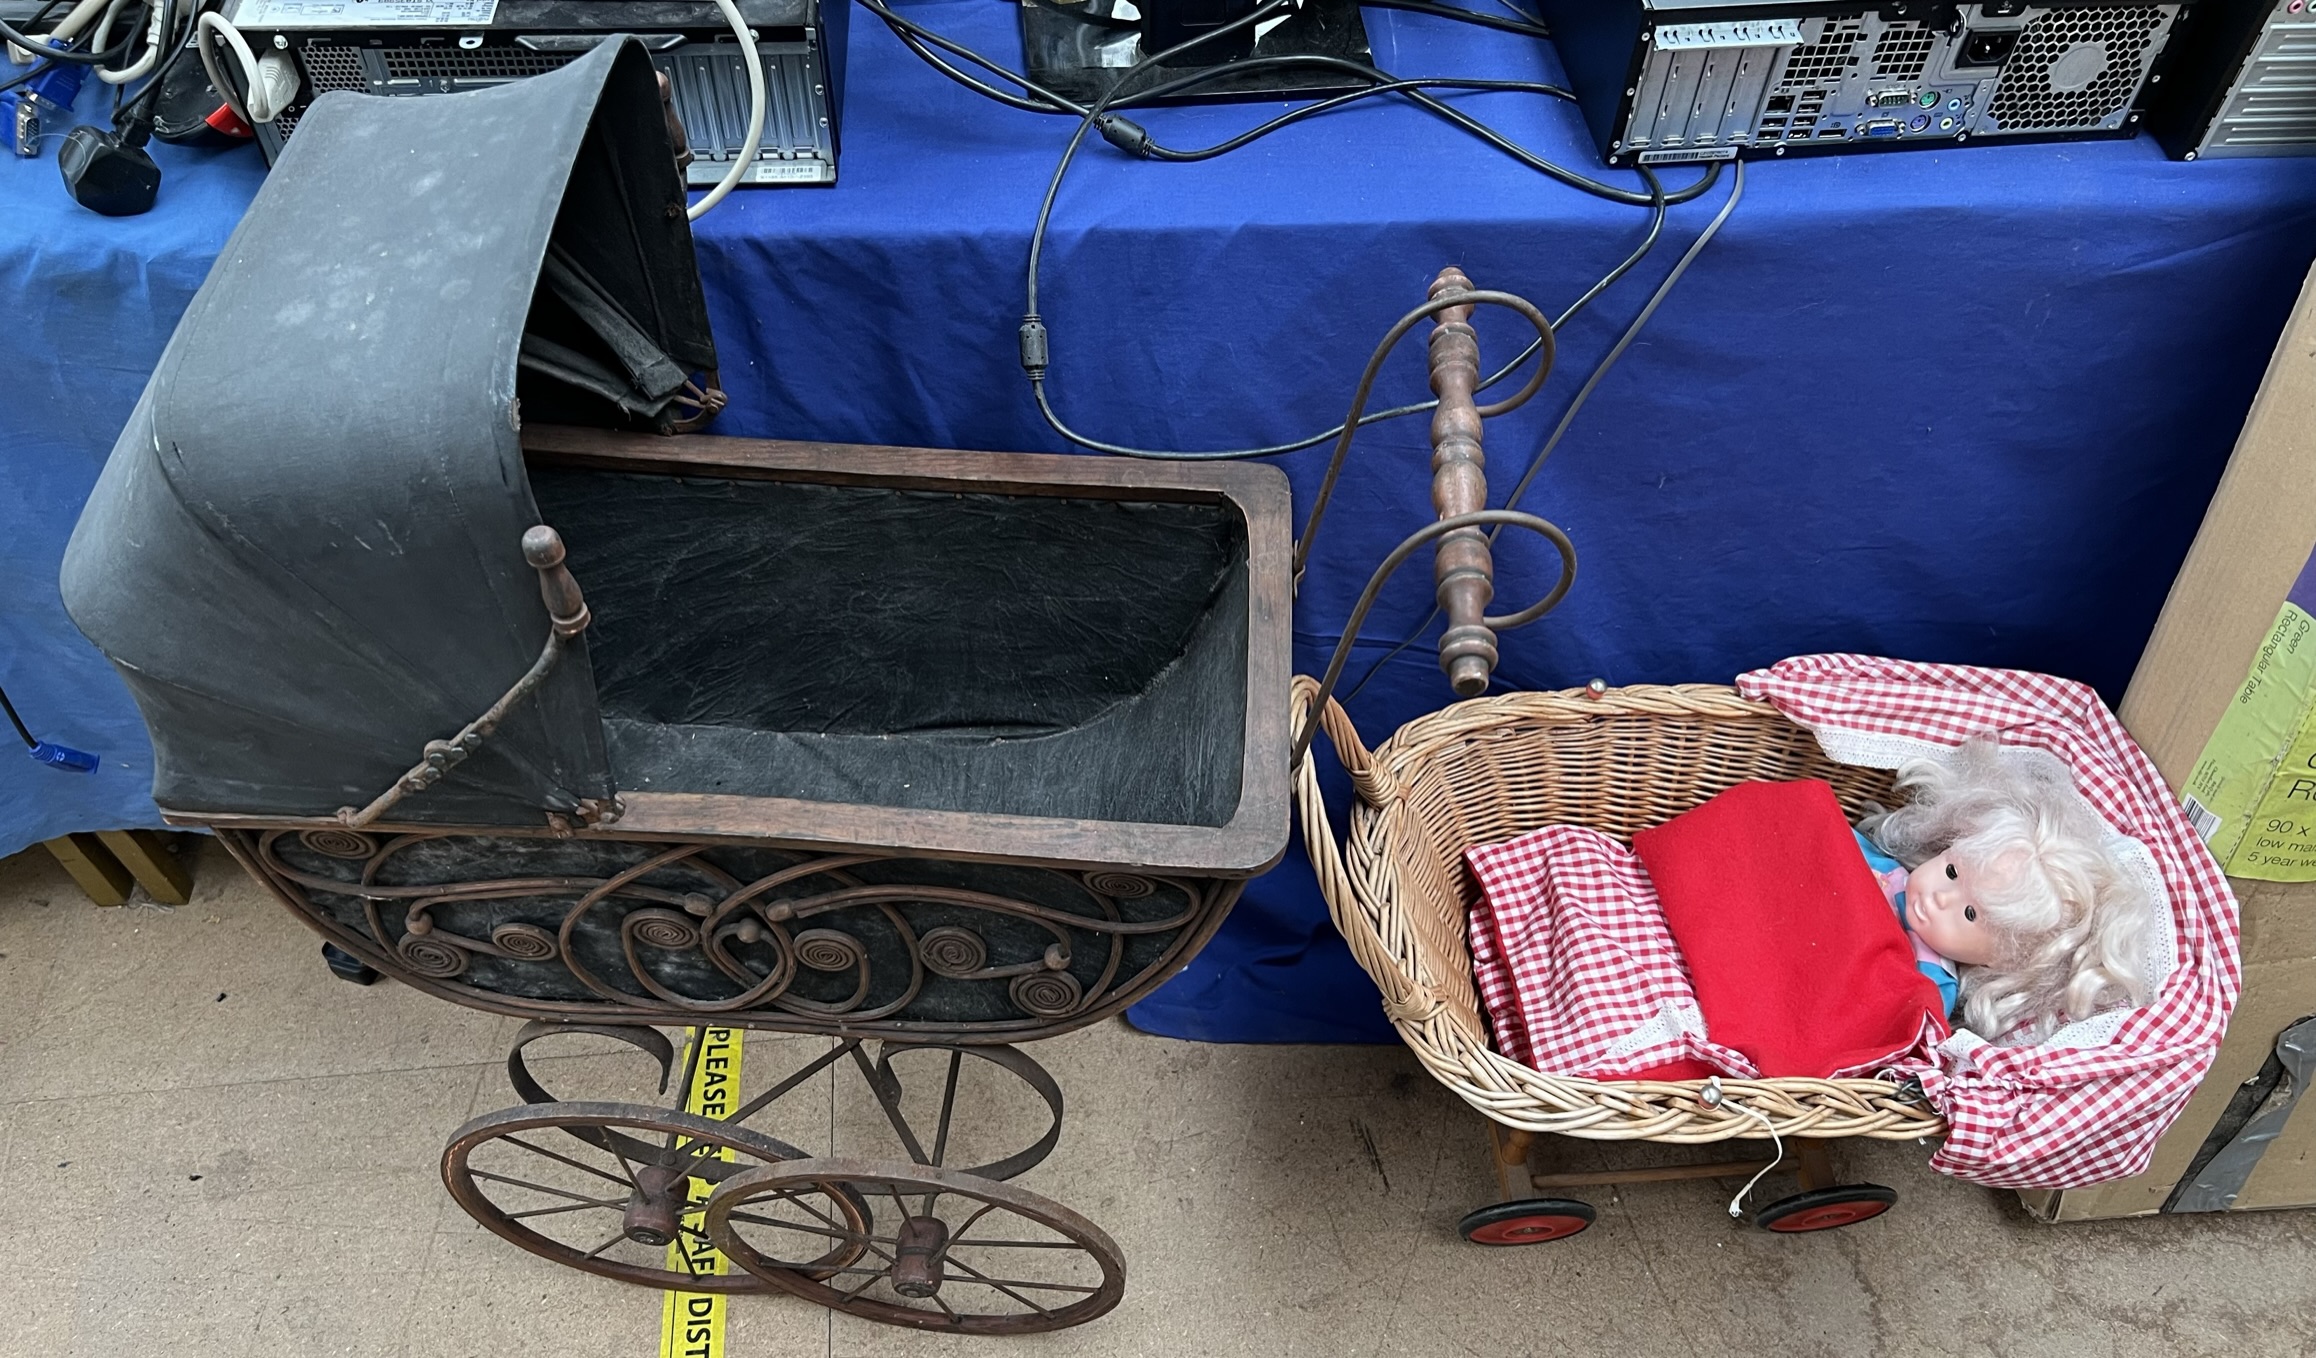 Two child's prams together with a doll etc ***TO BE RE-OFFERED IN A FUTURE SALE FOR ESTIMATES OF